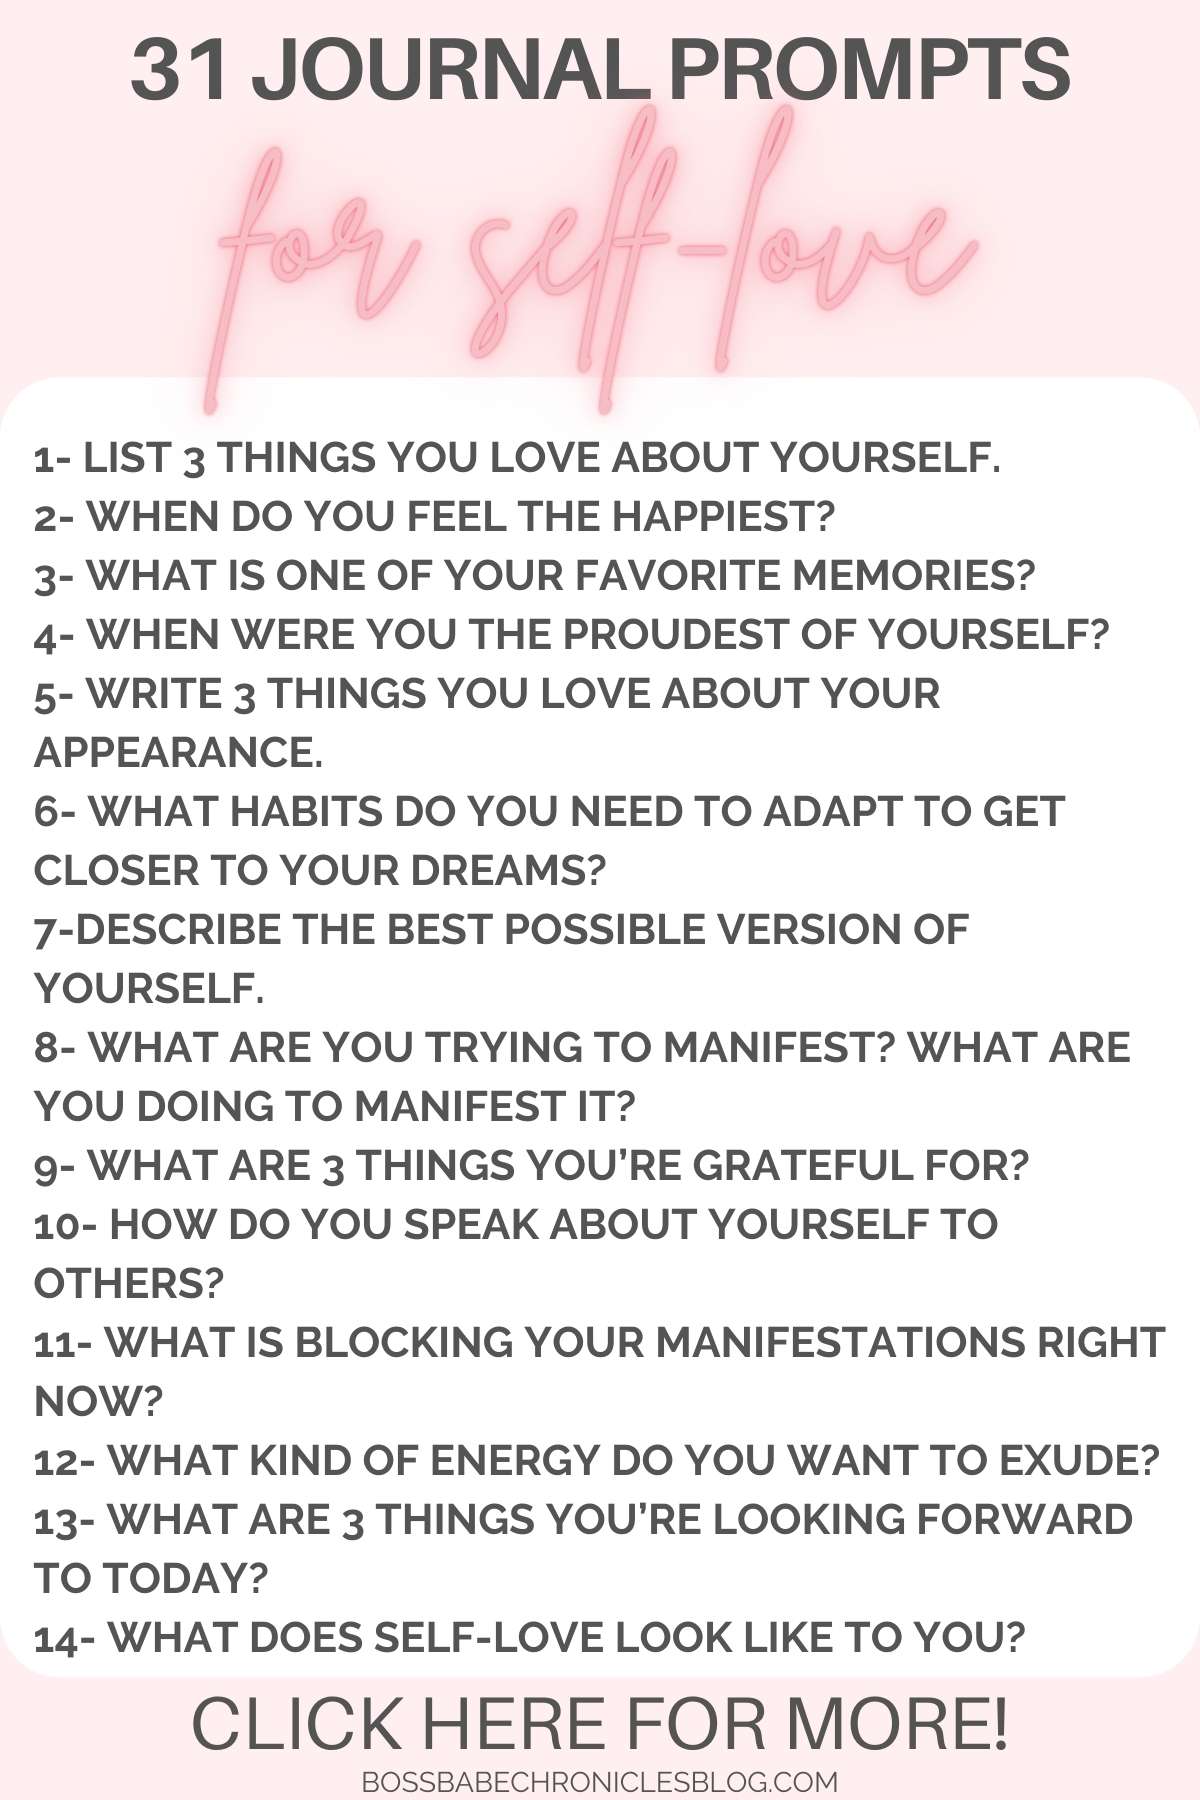 31 Journal Prompts For Self-Love - Boss Babe Chronicles